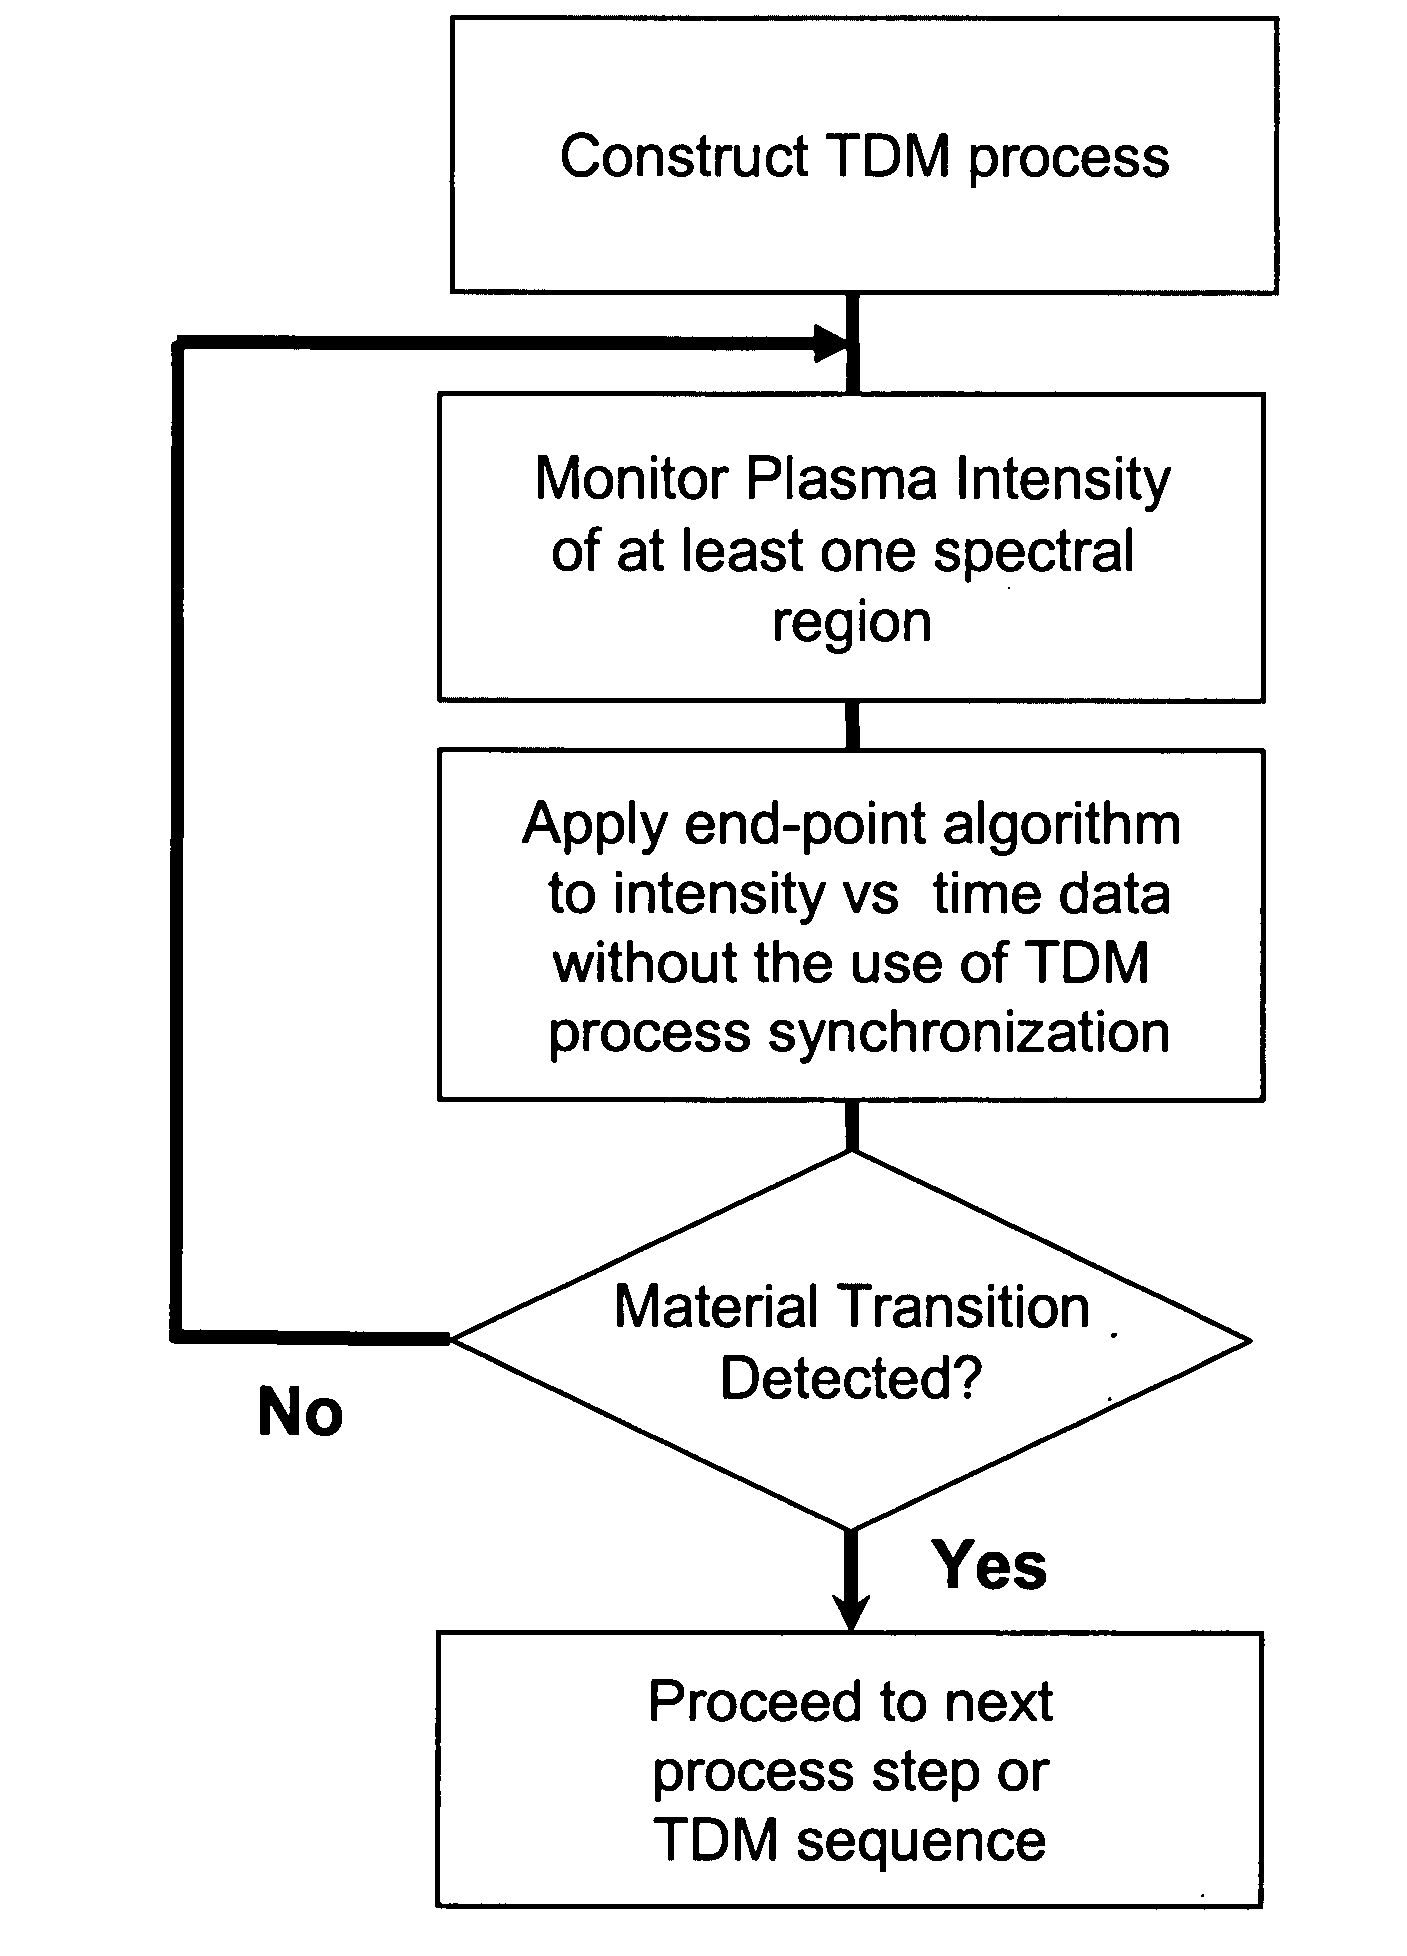 Selection of wavelengths for end point in a time division multiplexed process